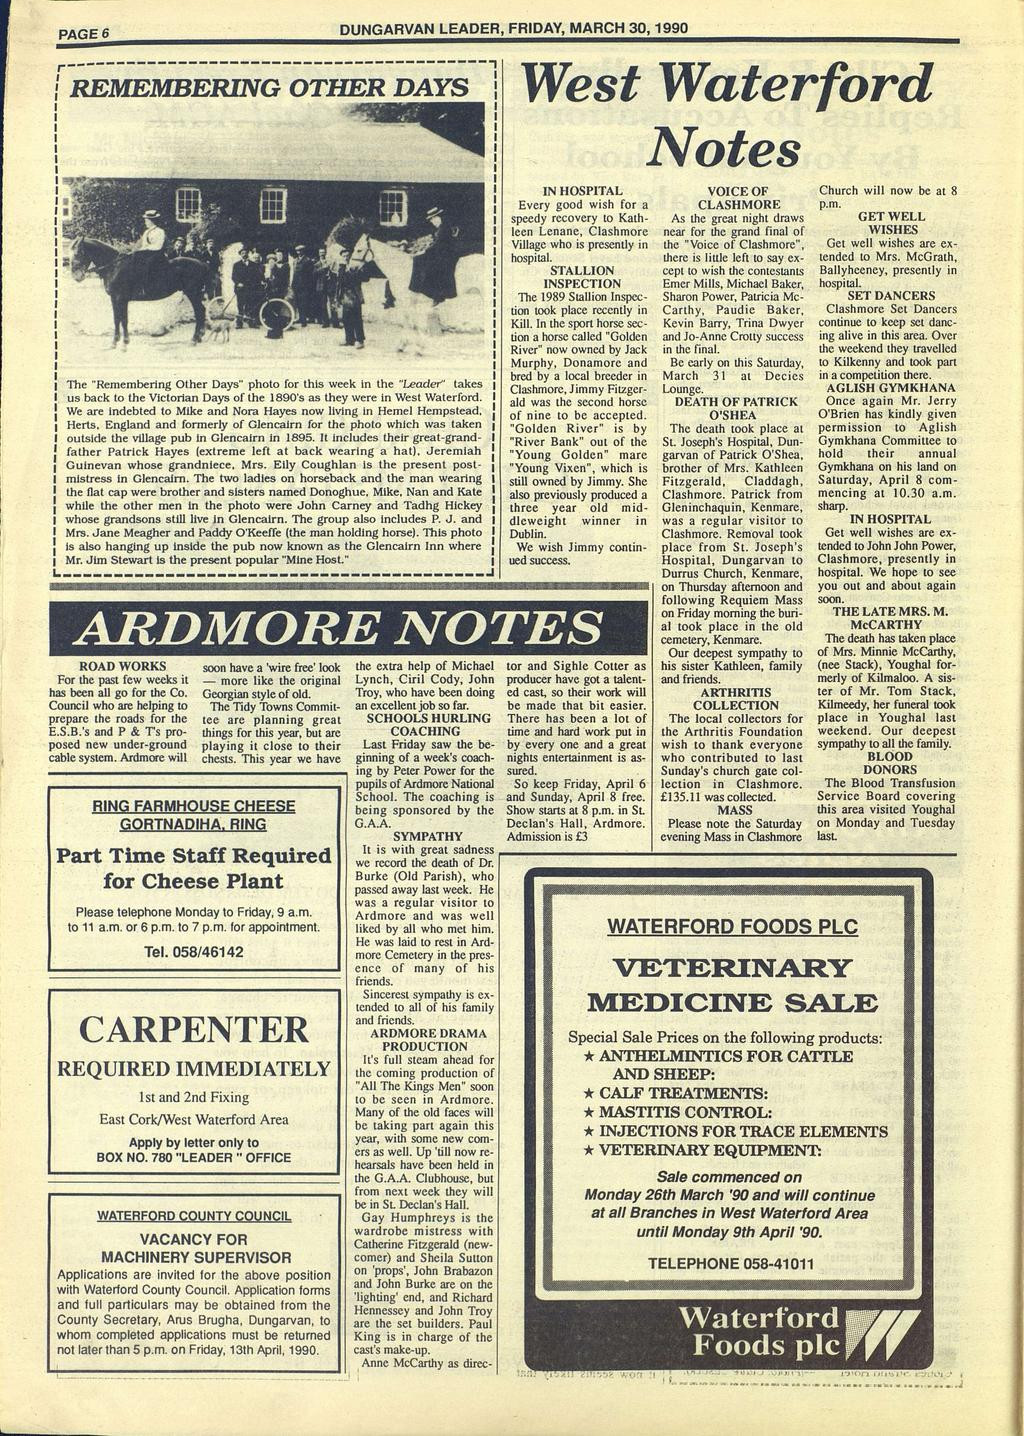 18 Fashionable Waterford 10 Inch Vase 2024 free download waterford 10 inch vase of dungarvan header and southern democrat friday march 30 pdf inside dungarvan leader fridayjanuary261990 page 6 remembering other days west waterford notes